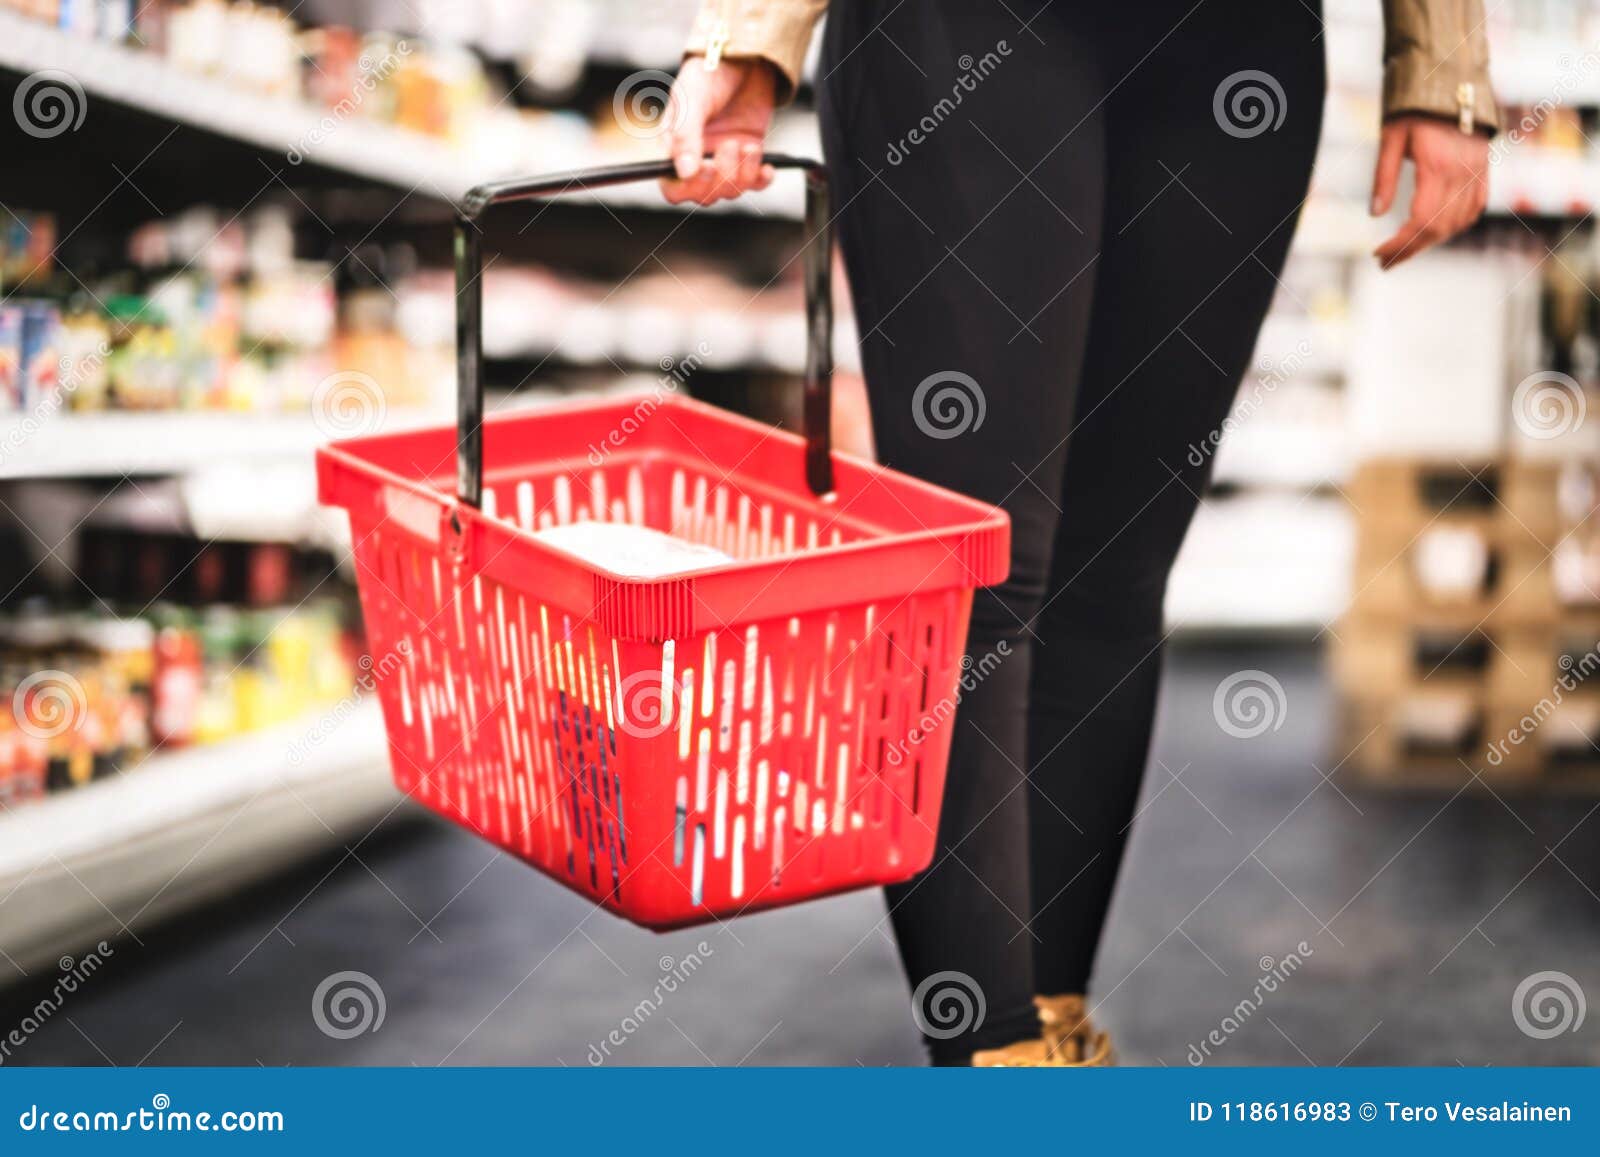 woman holding shopping basket and walking in grocery store aisle